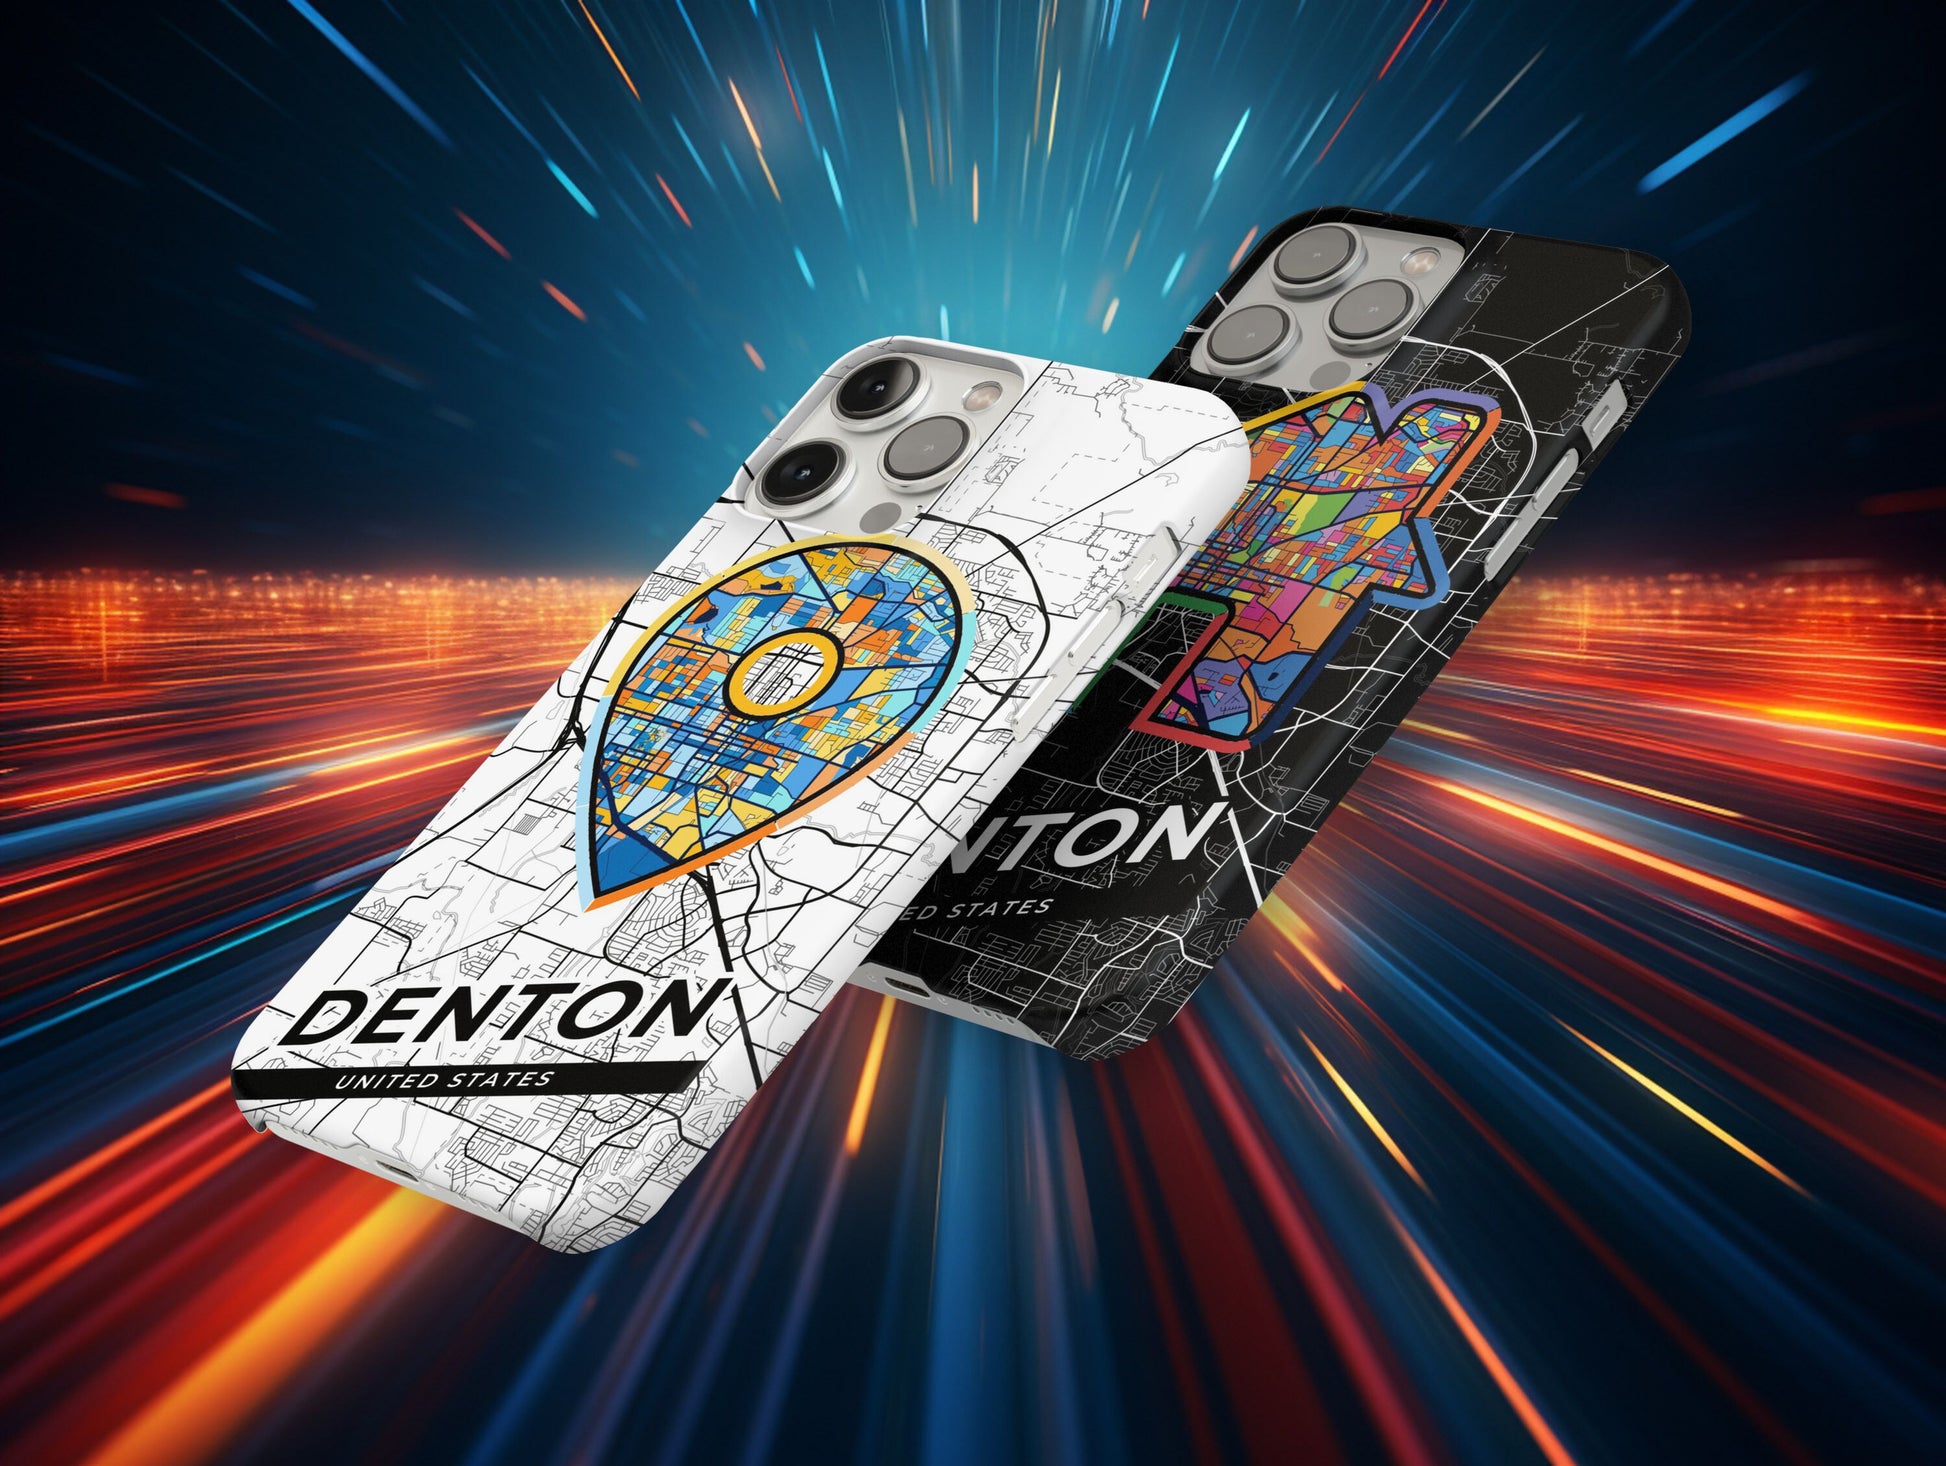 Denton Texas slim phone case with colorful icon. Birthday, wedding or housewarming gift. Couple match cases.